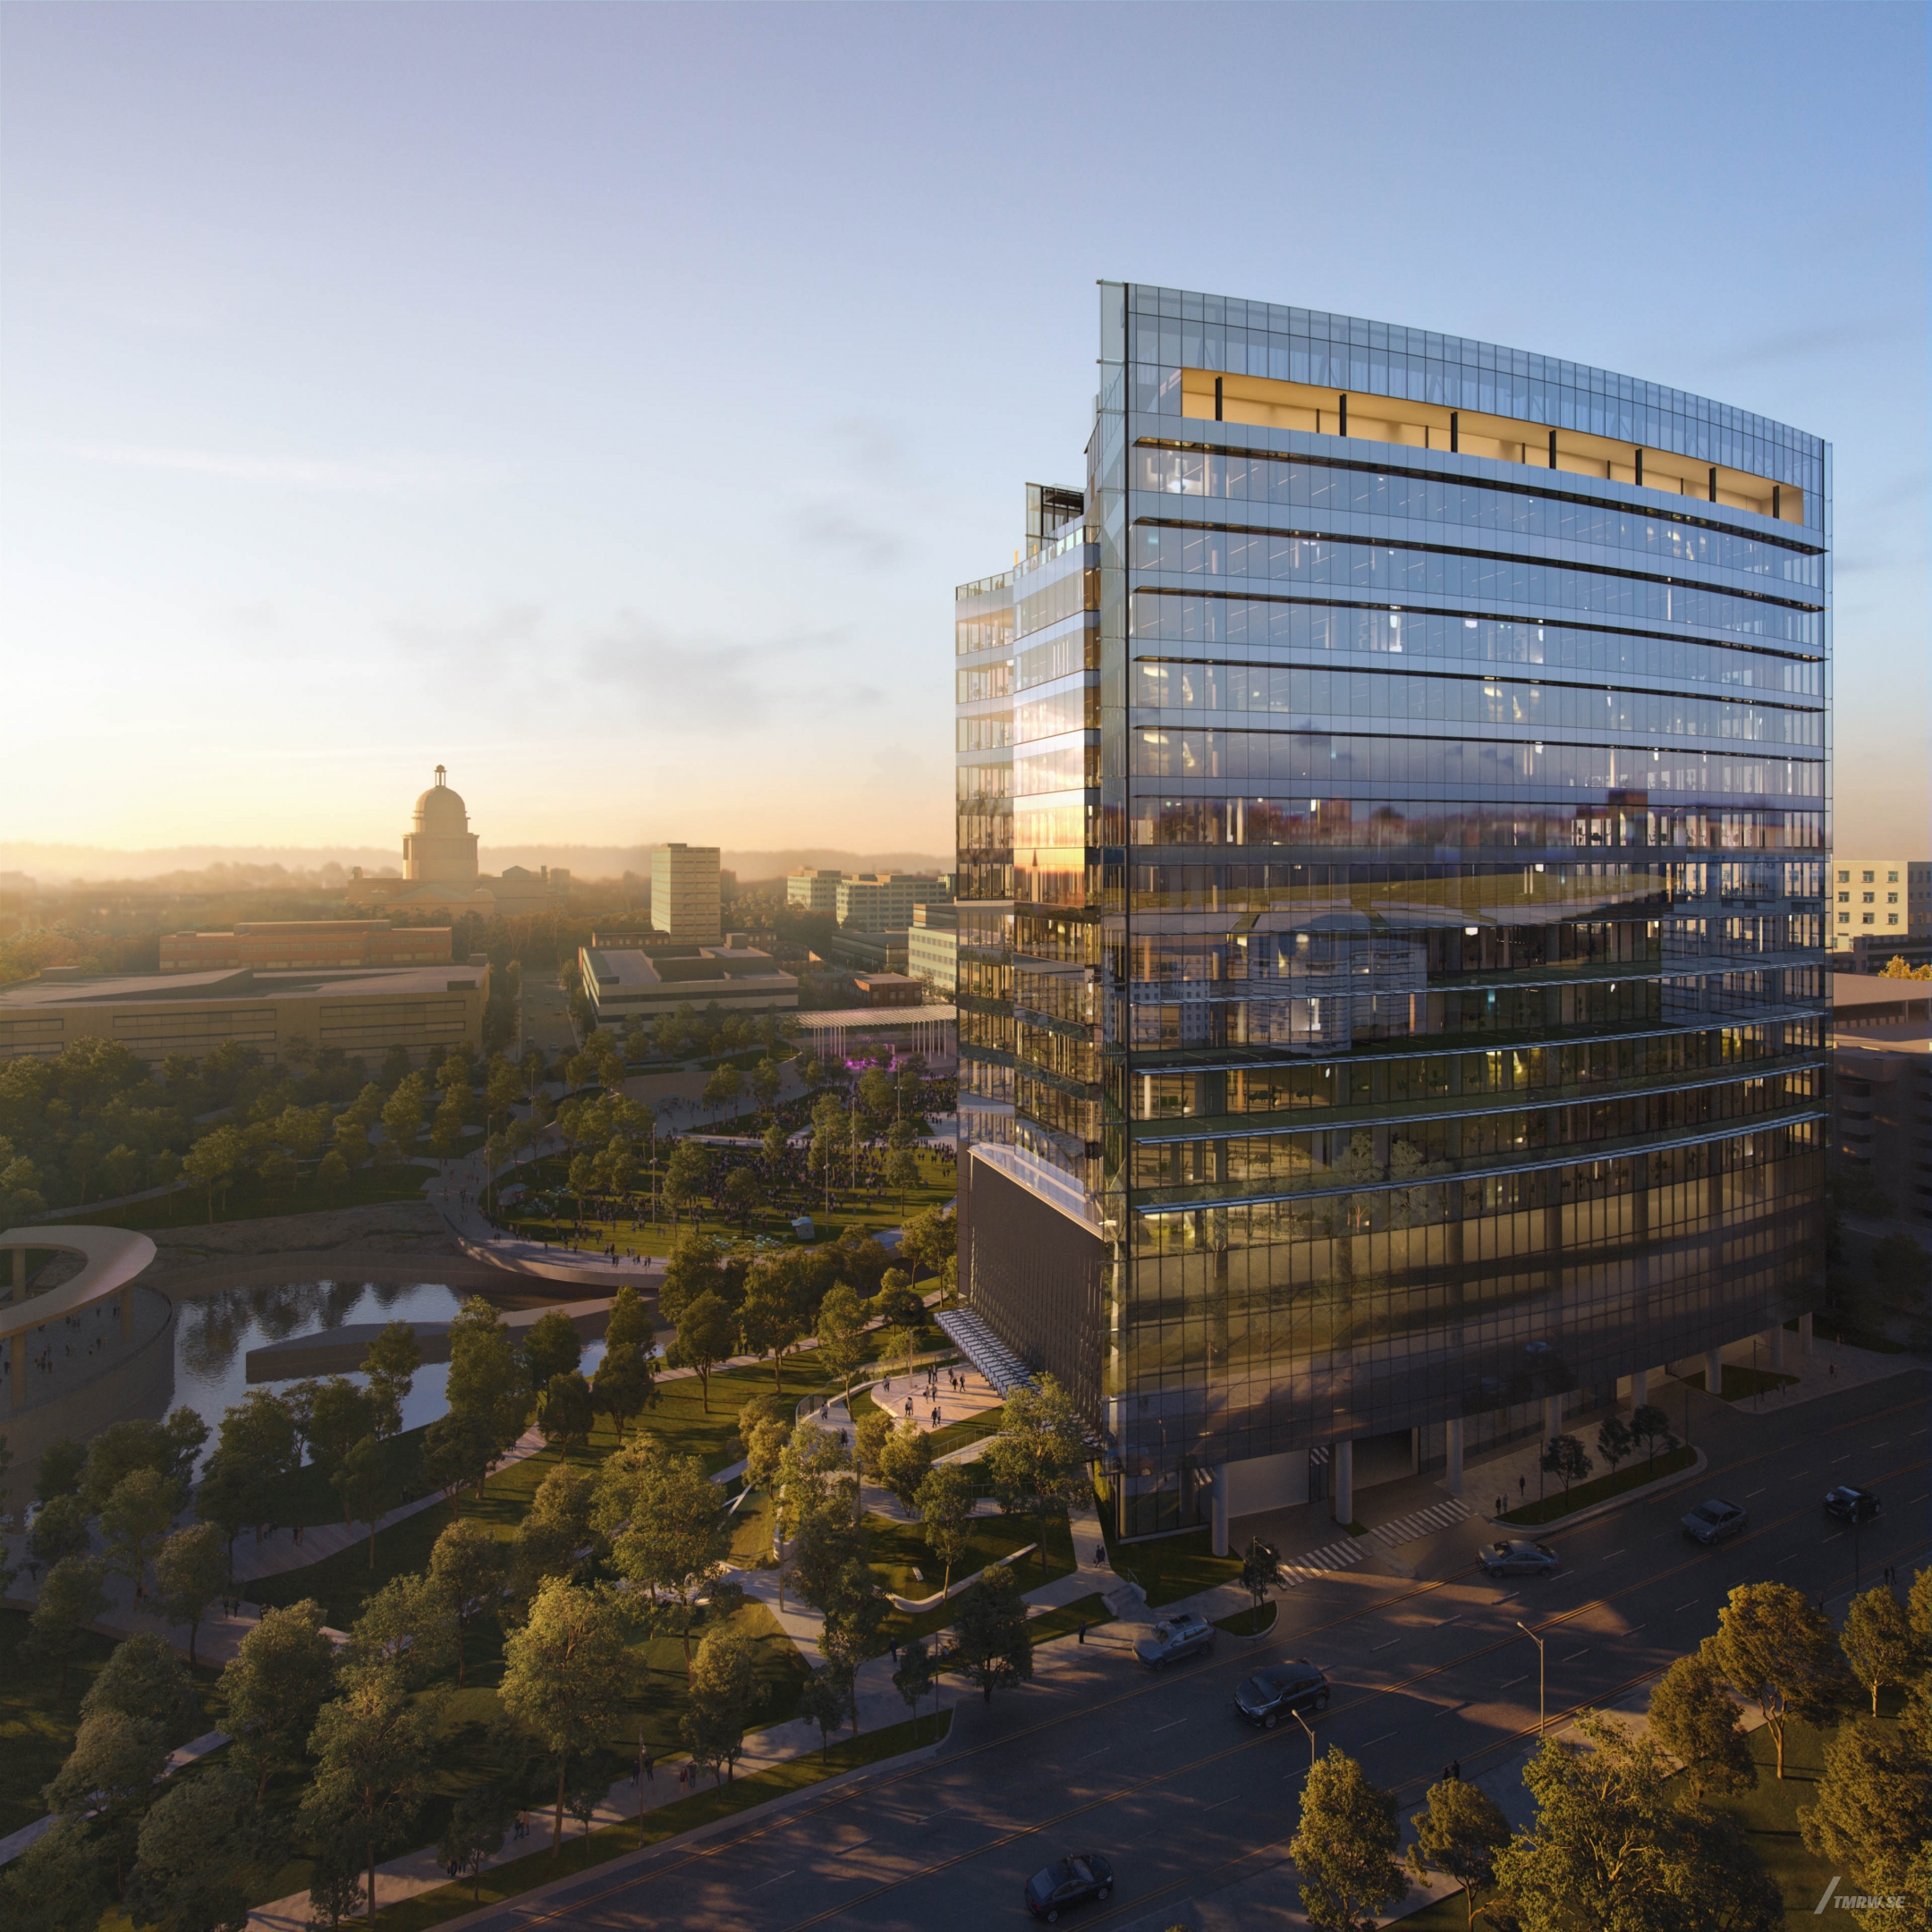 Architectural visualization of Block 164 for Gensler, a office building goldenhour light from a semi areal view.